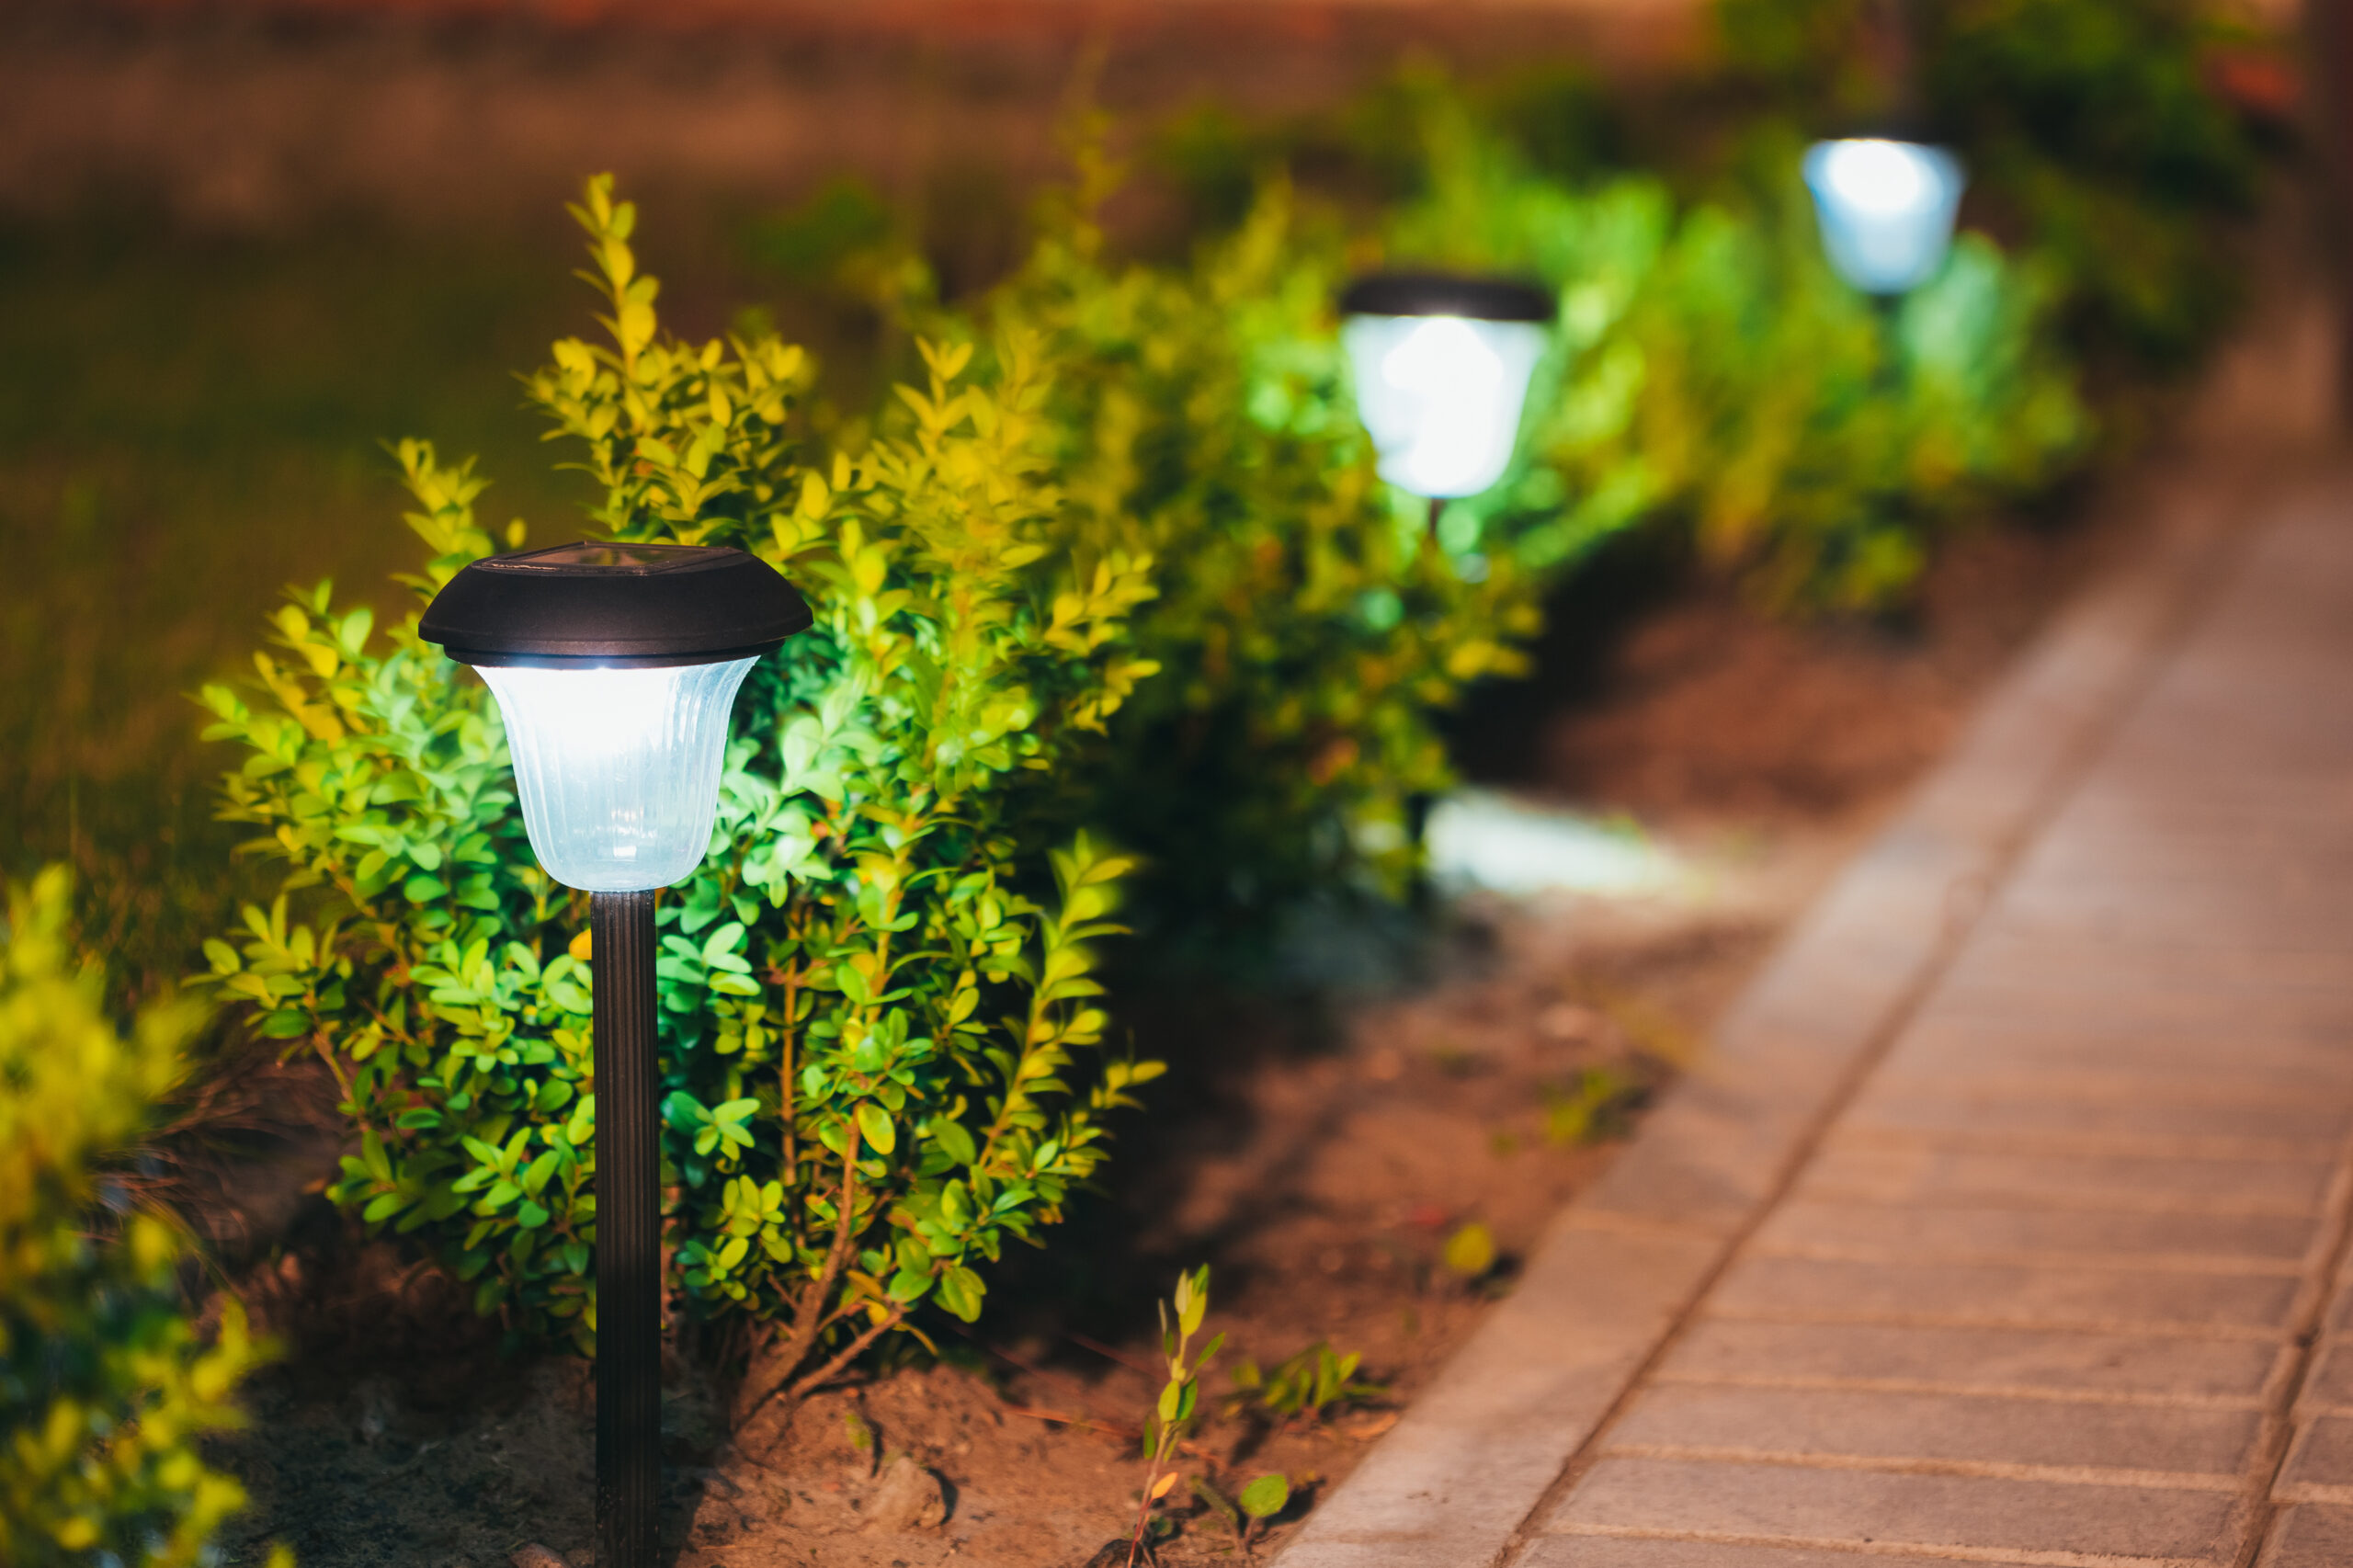 Should you install solar landscape lighting in New Vienna village, OH